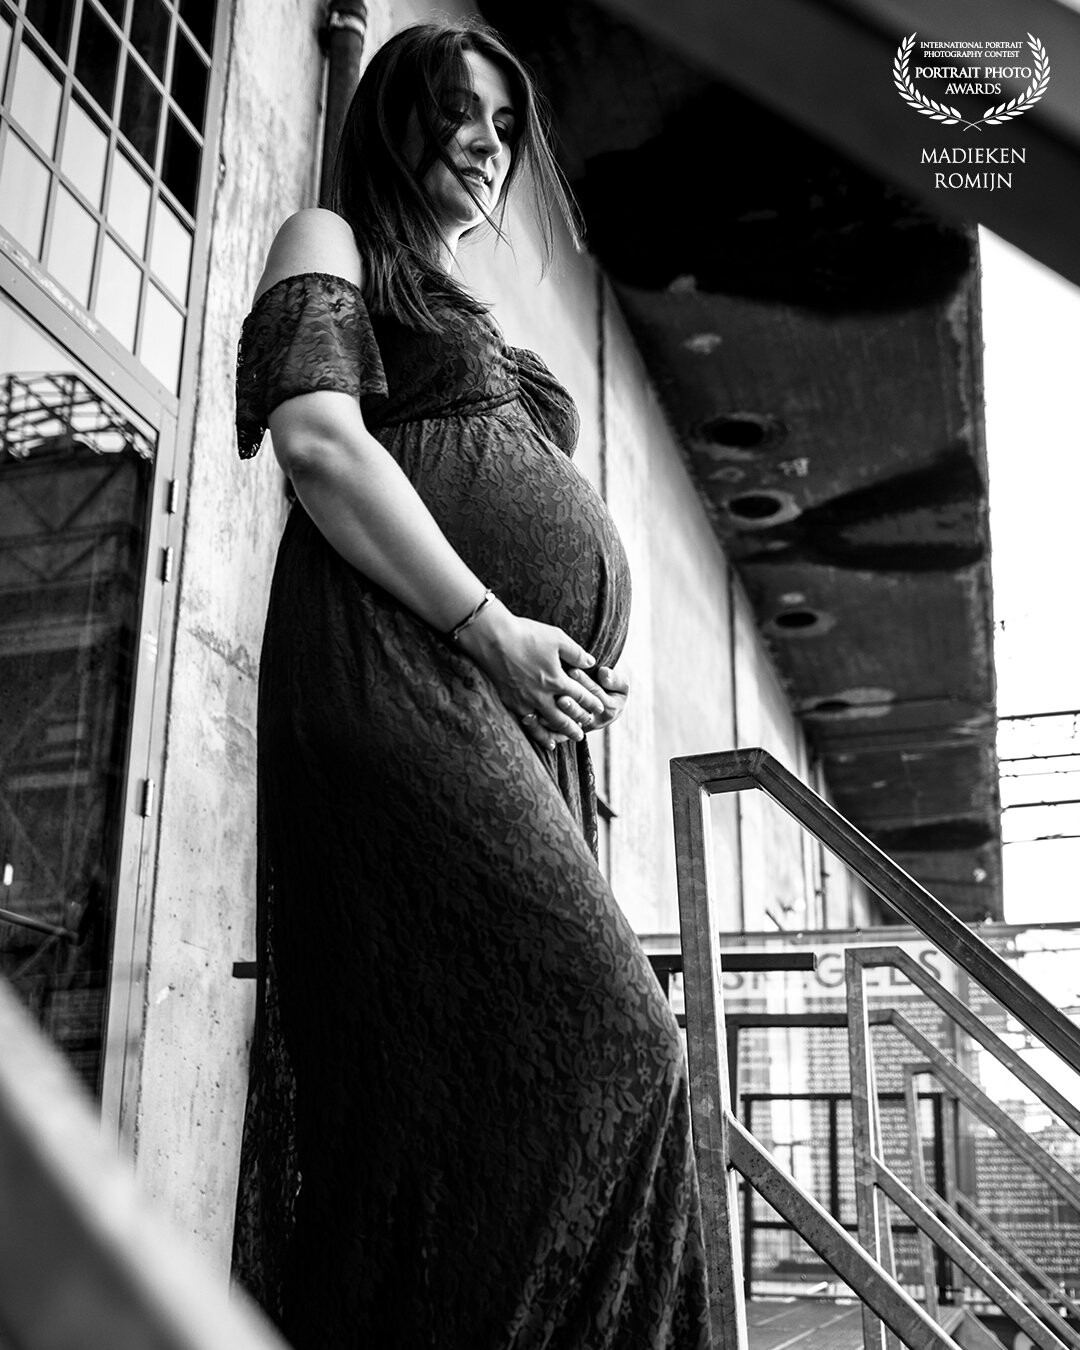 In this pregnancyshoot I wanted to find a industrial location with a romantical twist for the dress. The low angle and the lines in the picture Made this one of my favorites. And she was so sweet as well!